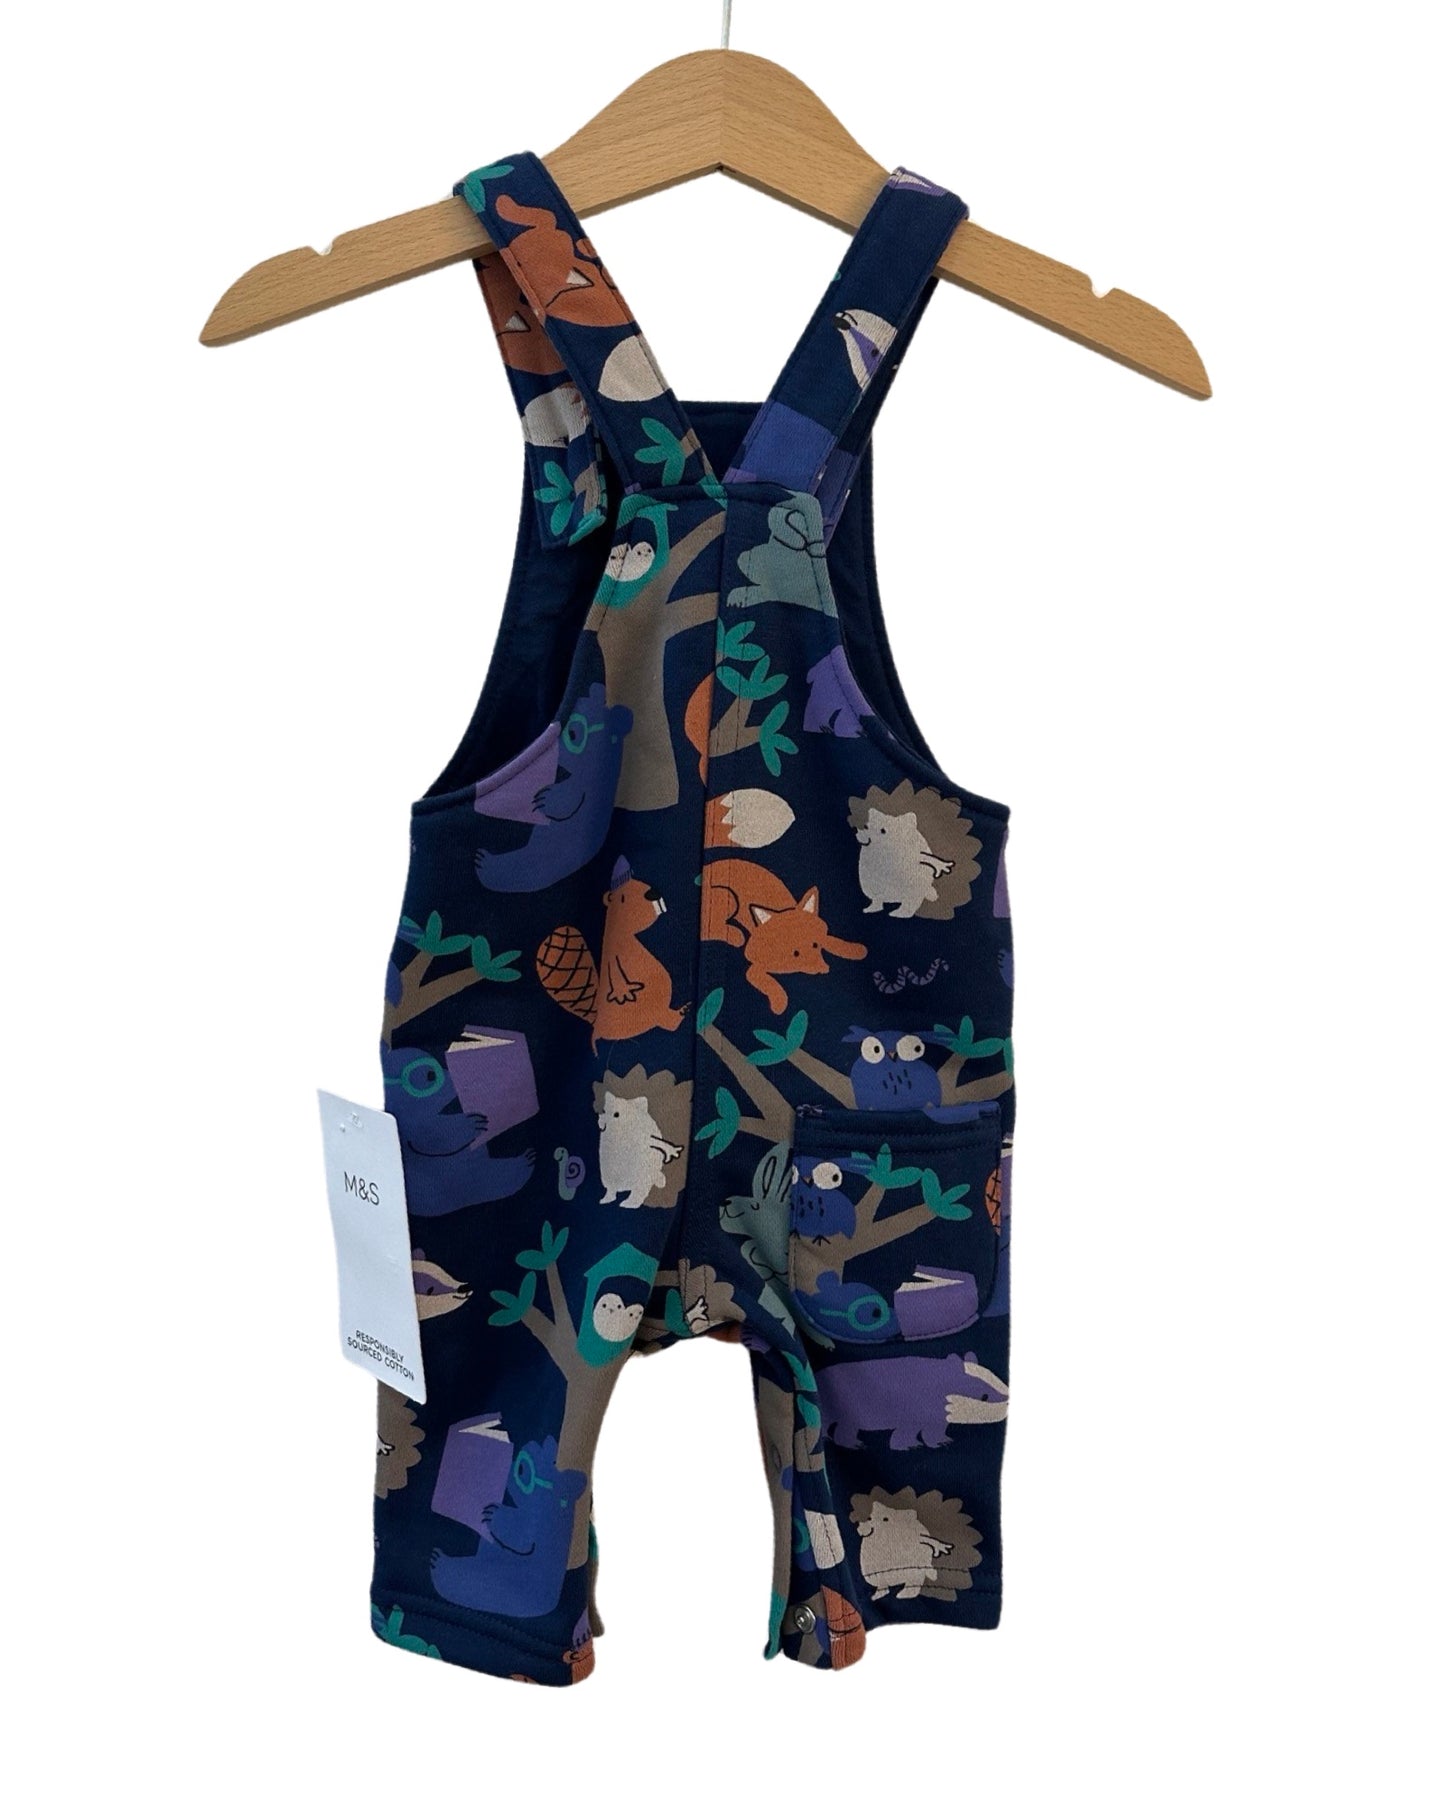 M&S printed navy dungarees (0-3mths)